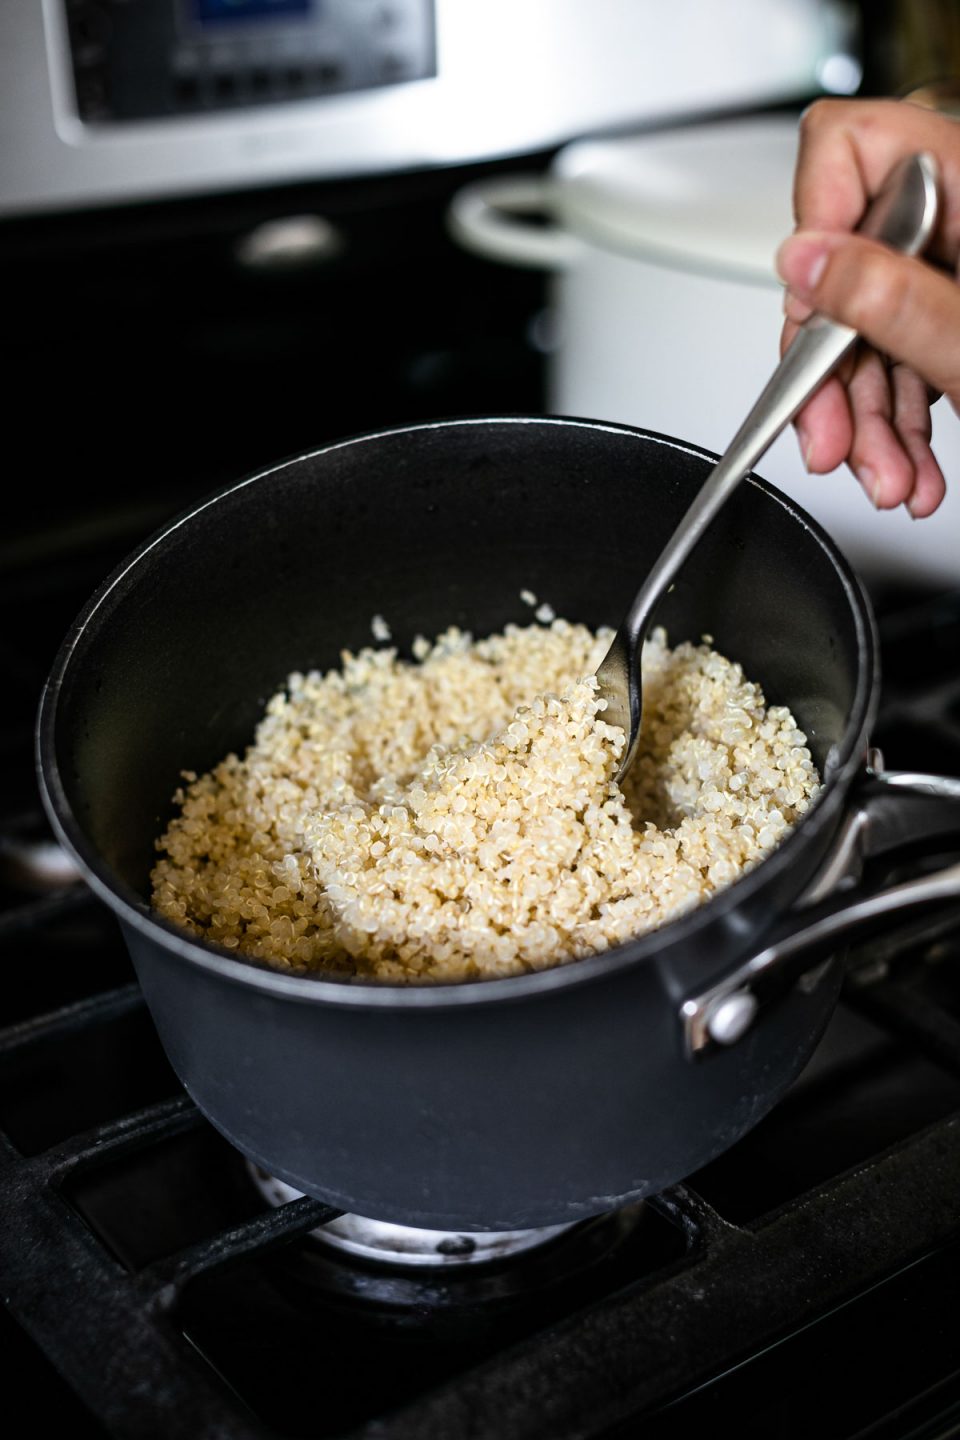 A sauce pan filled with cooked white quinoa sits on top of a gas stovetop. A woman's hand is holding a fork & fluffing the perfectly cooked quinoa prior to serving or storing.